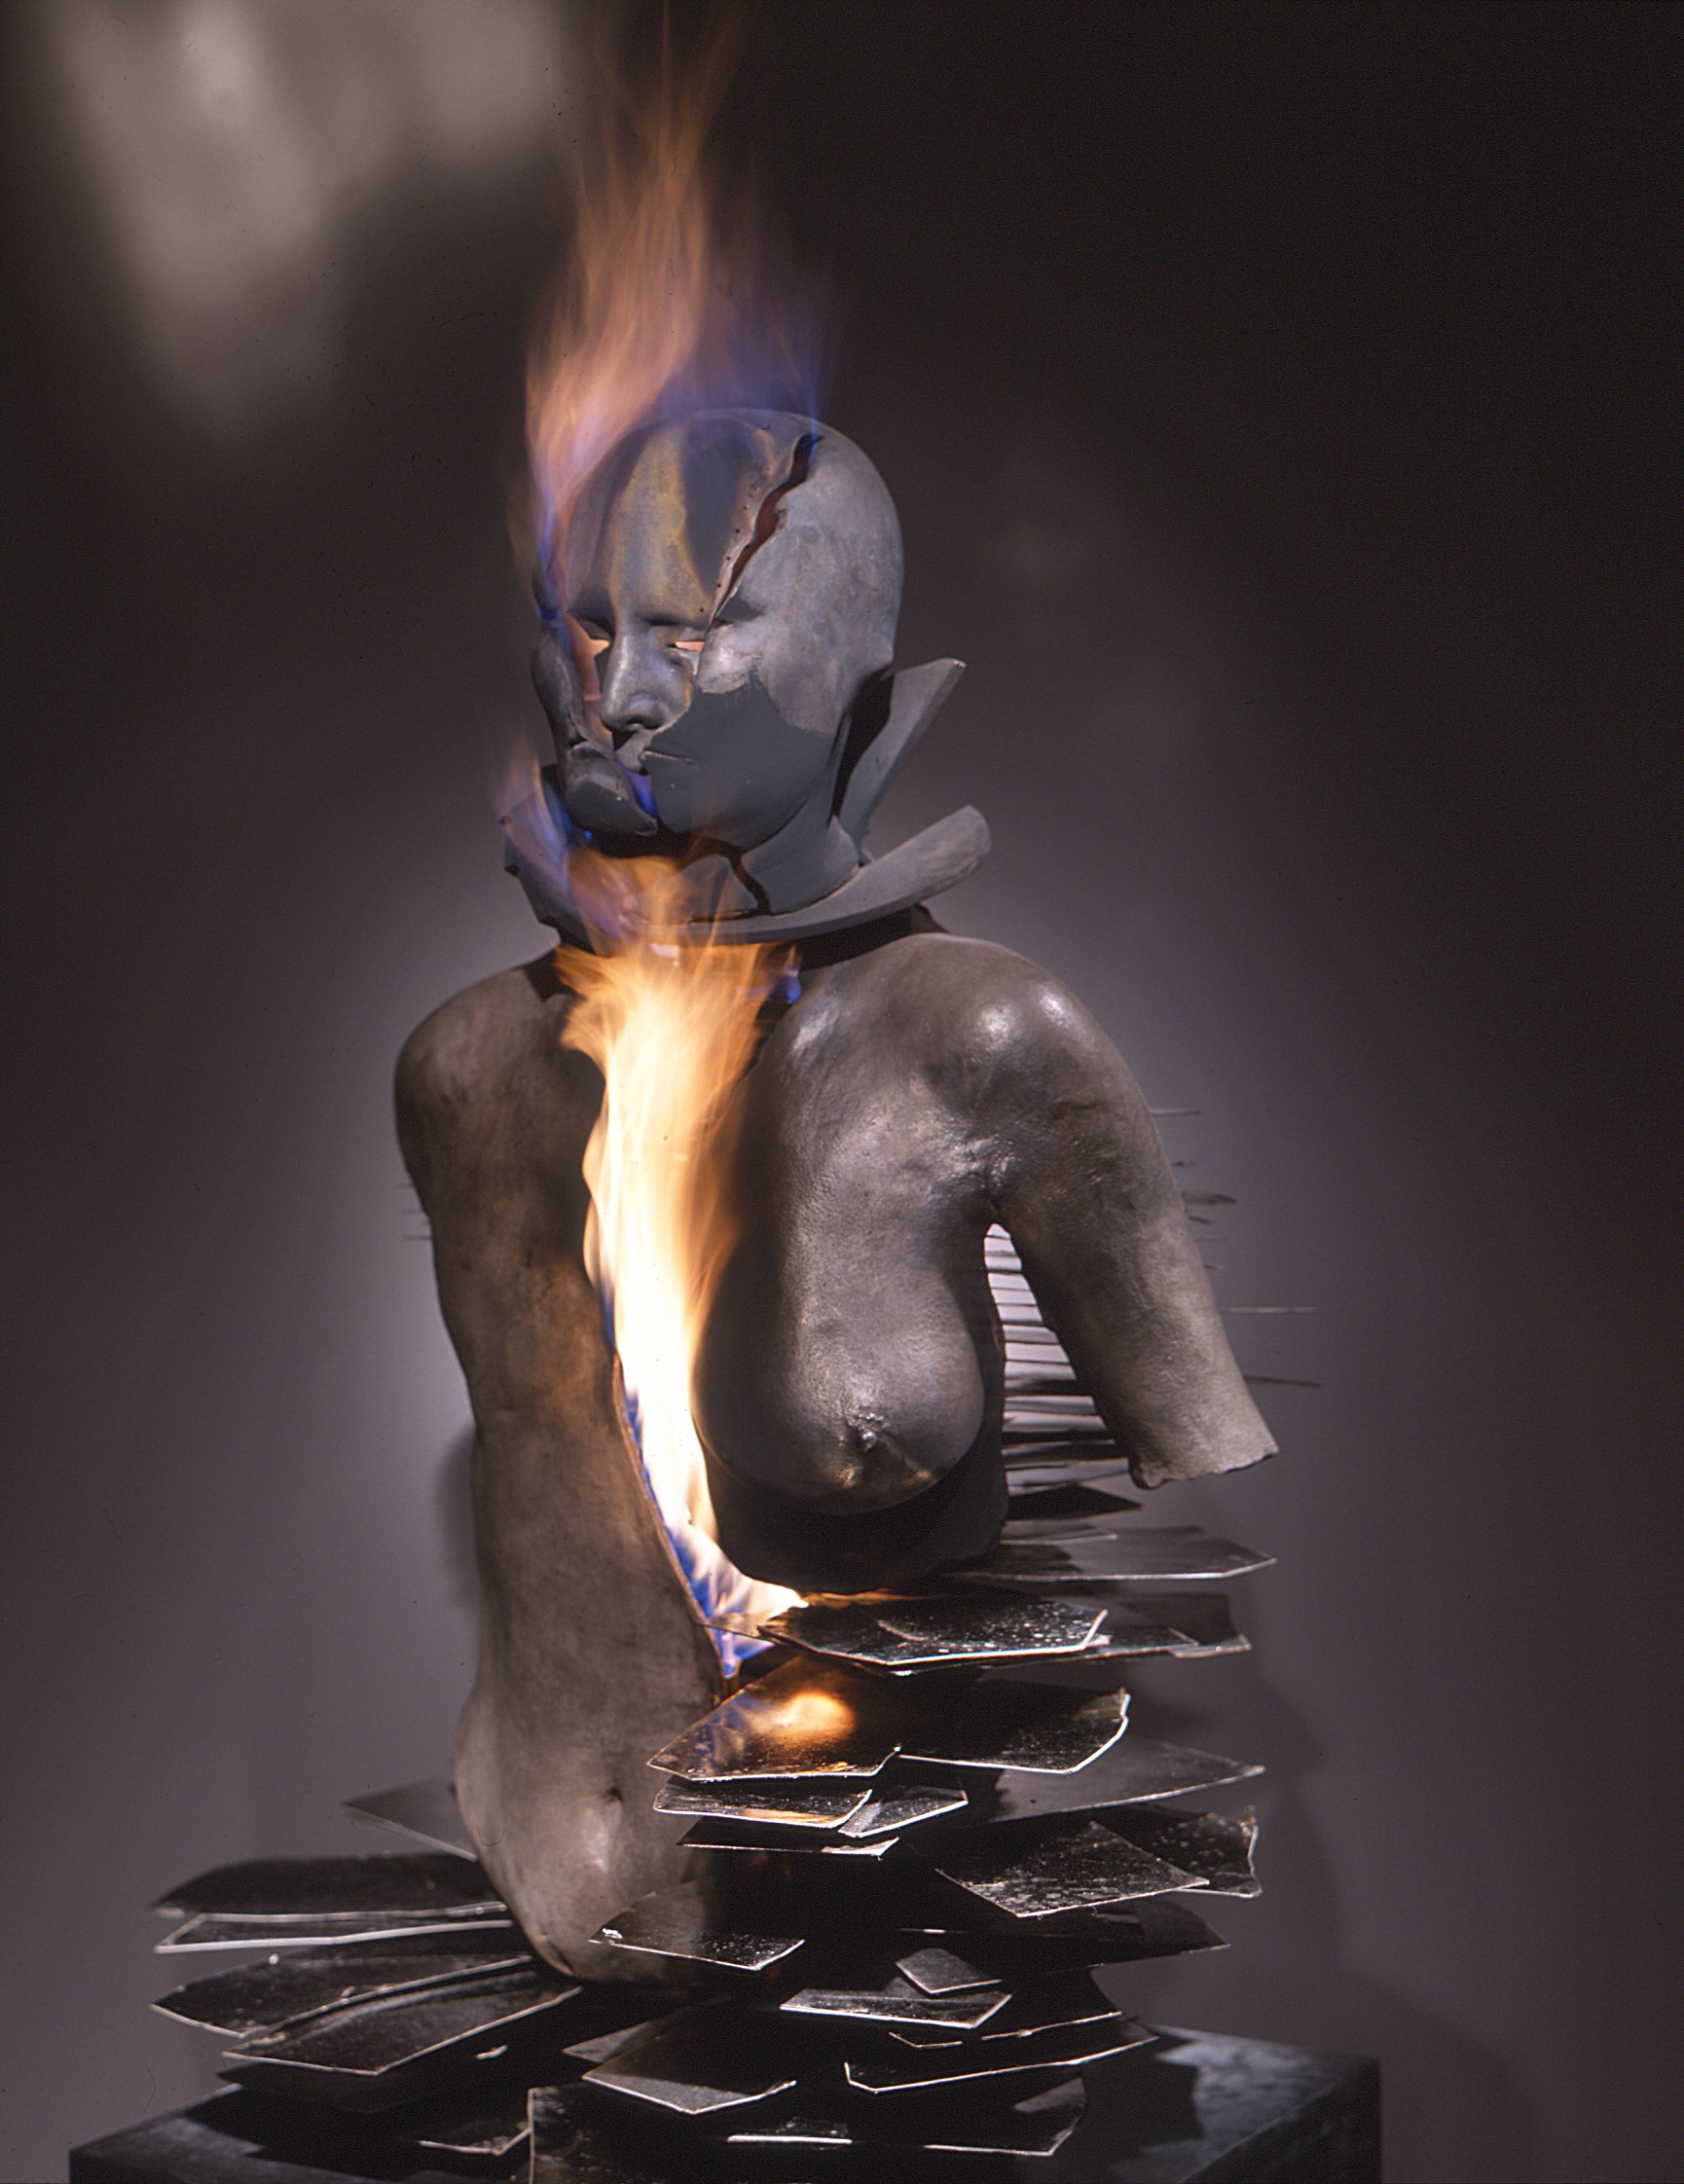 Liliane Lijn, Lilith, patinated bronze, phlogopite mica, gas, brass and stainless steel fittings, 186.5 x 55.5 x 60 cm, 2001